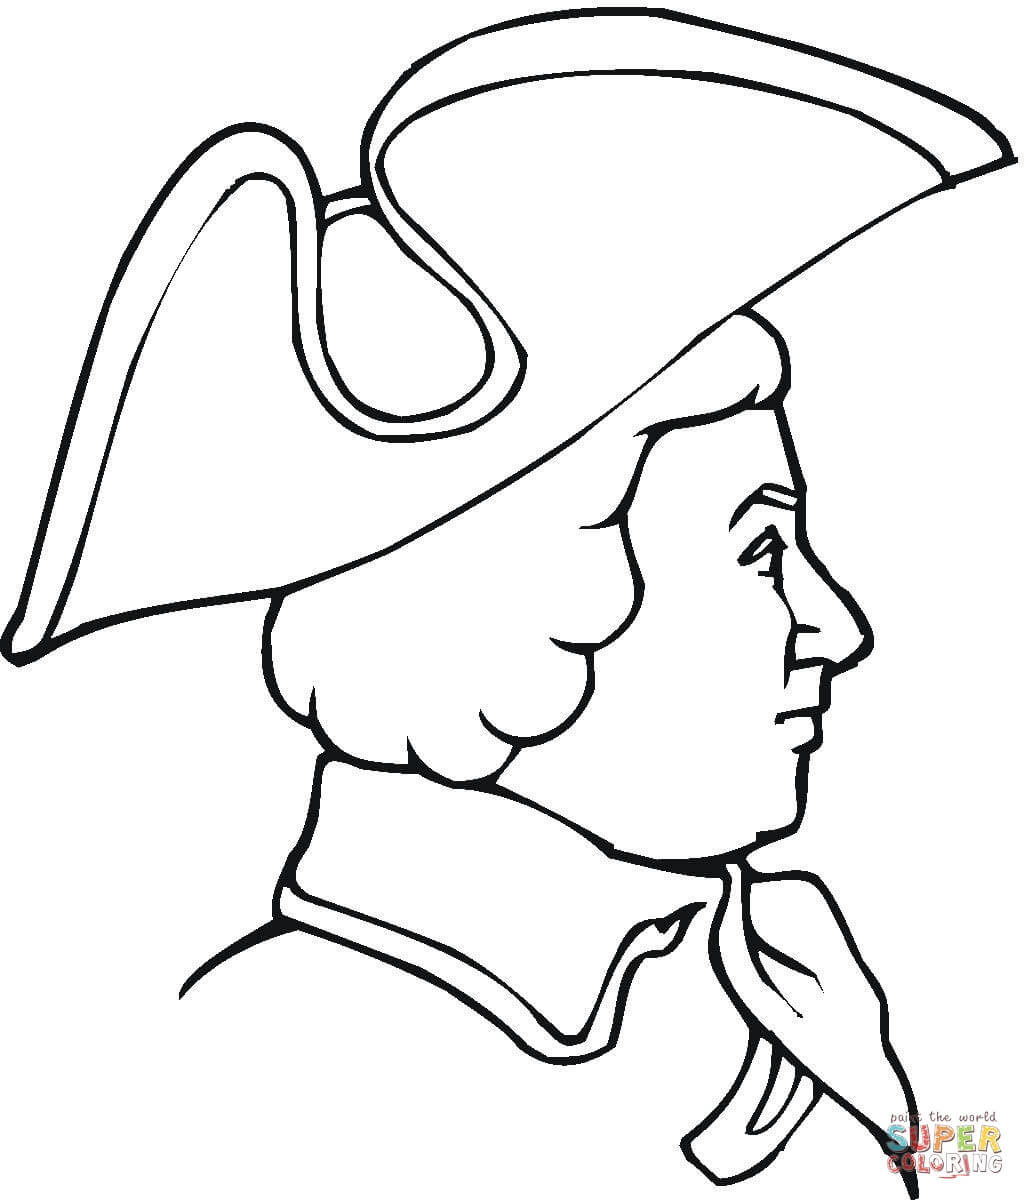 Revolutionary War Soldier coloring page | Free Printable Coloring ...